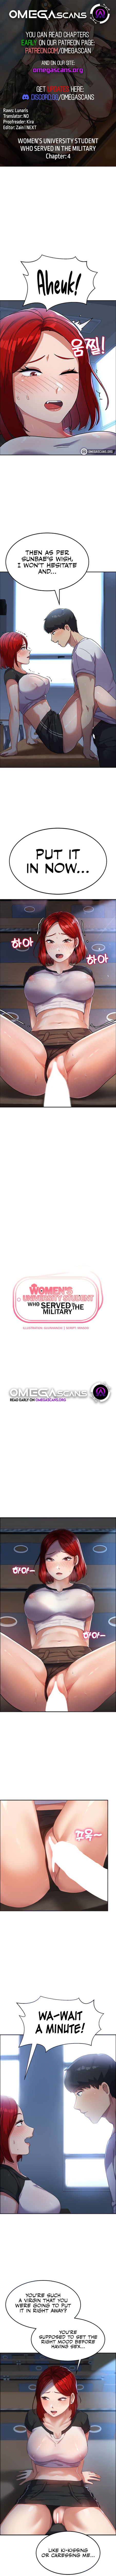 womens-university-student-who-served-in-the-military-chap-4-0